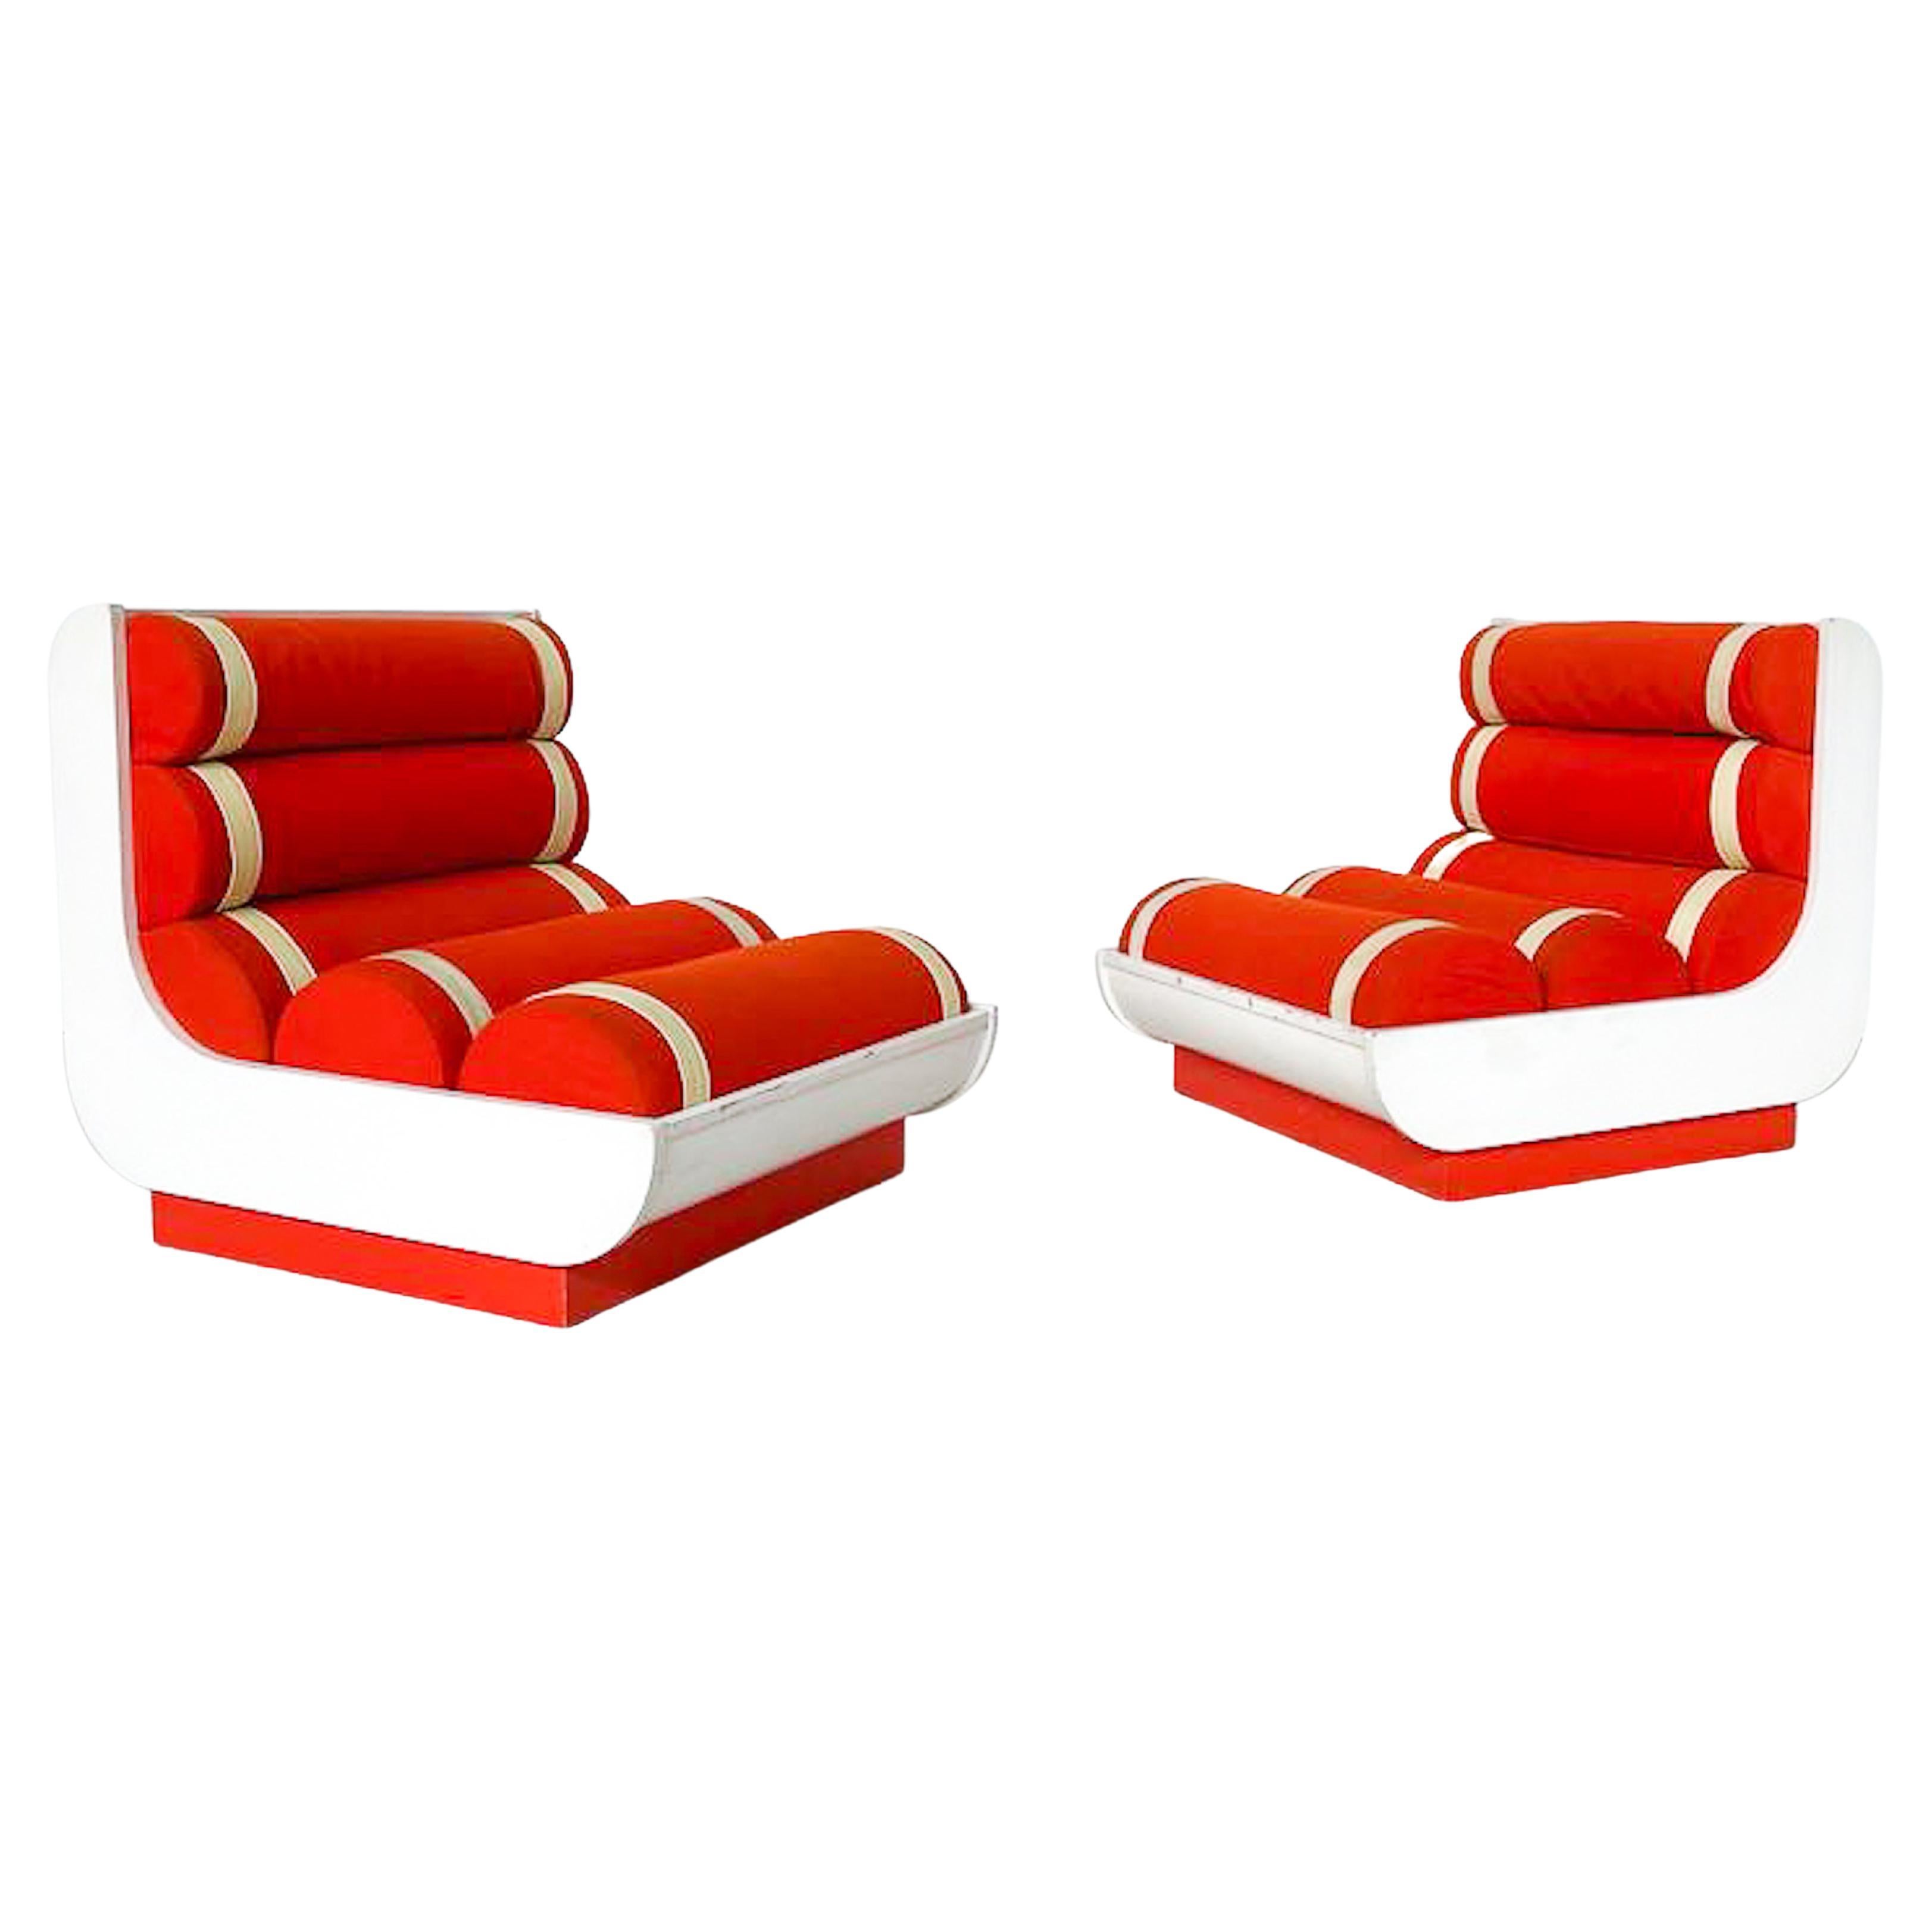 Mid-Century Modern Pair of Italian Red Armchairs, 1960s, Orignal Upholstery For Sale